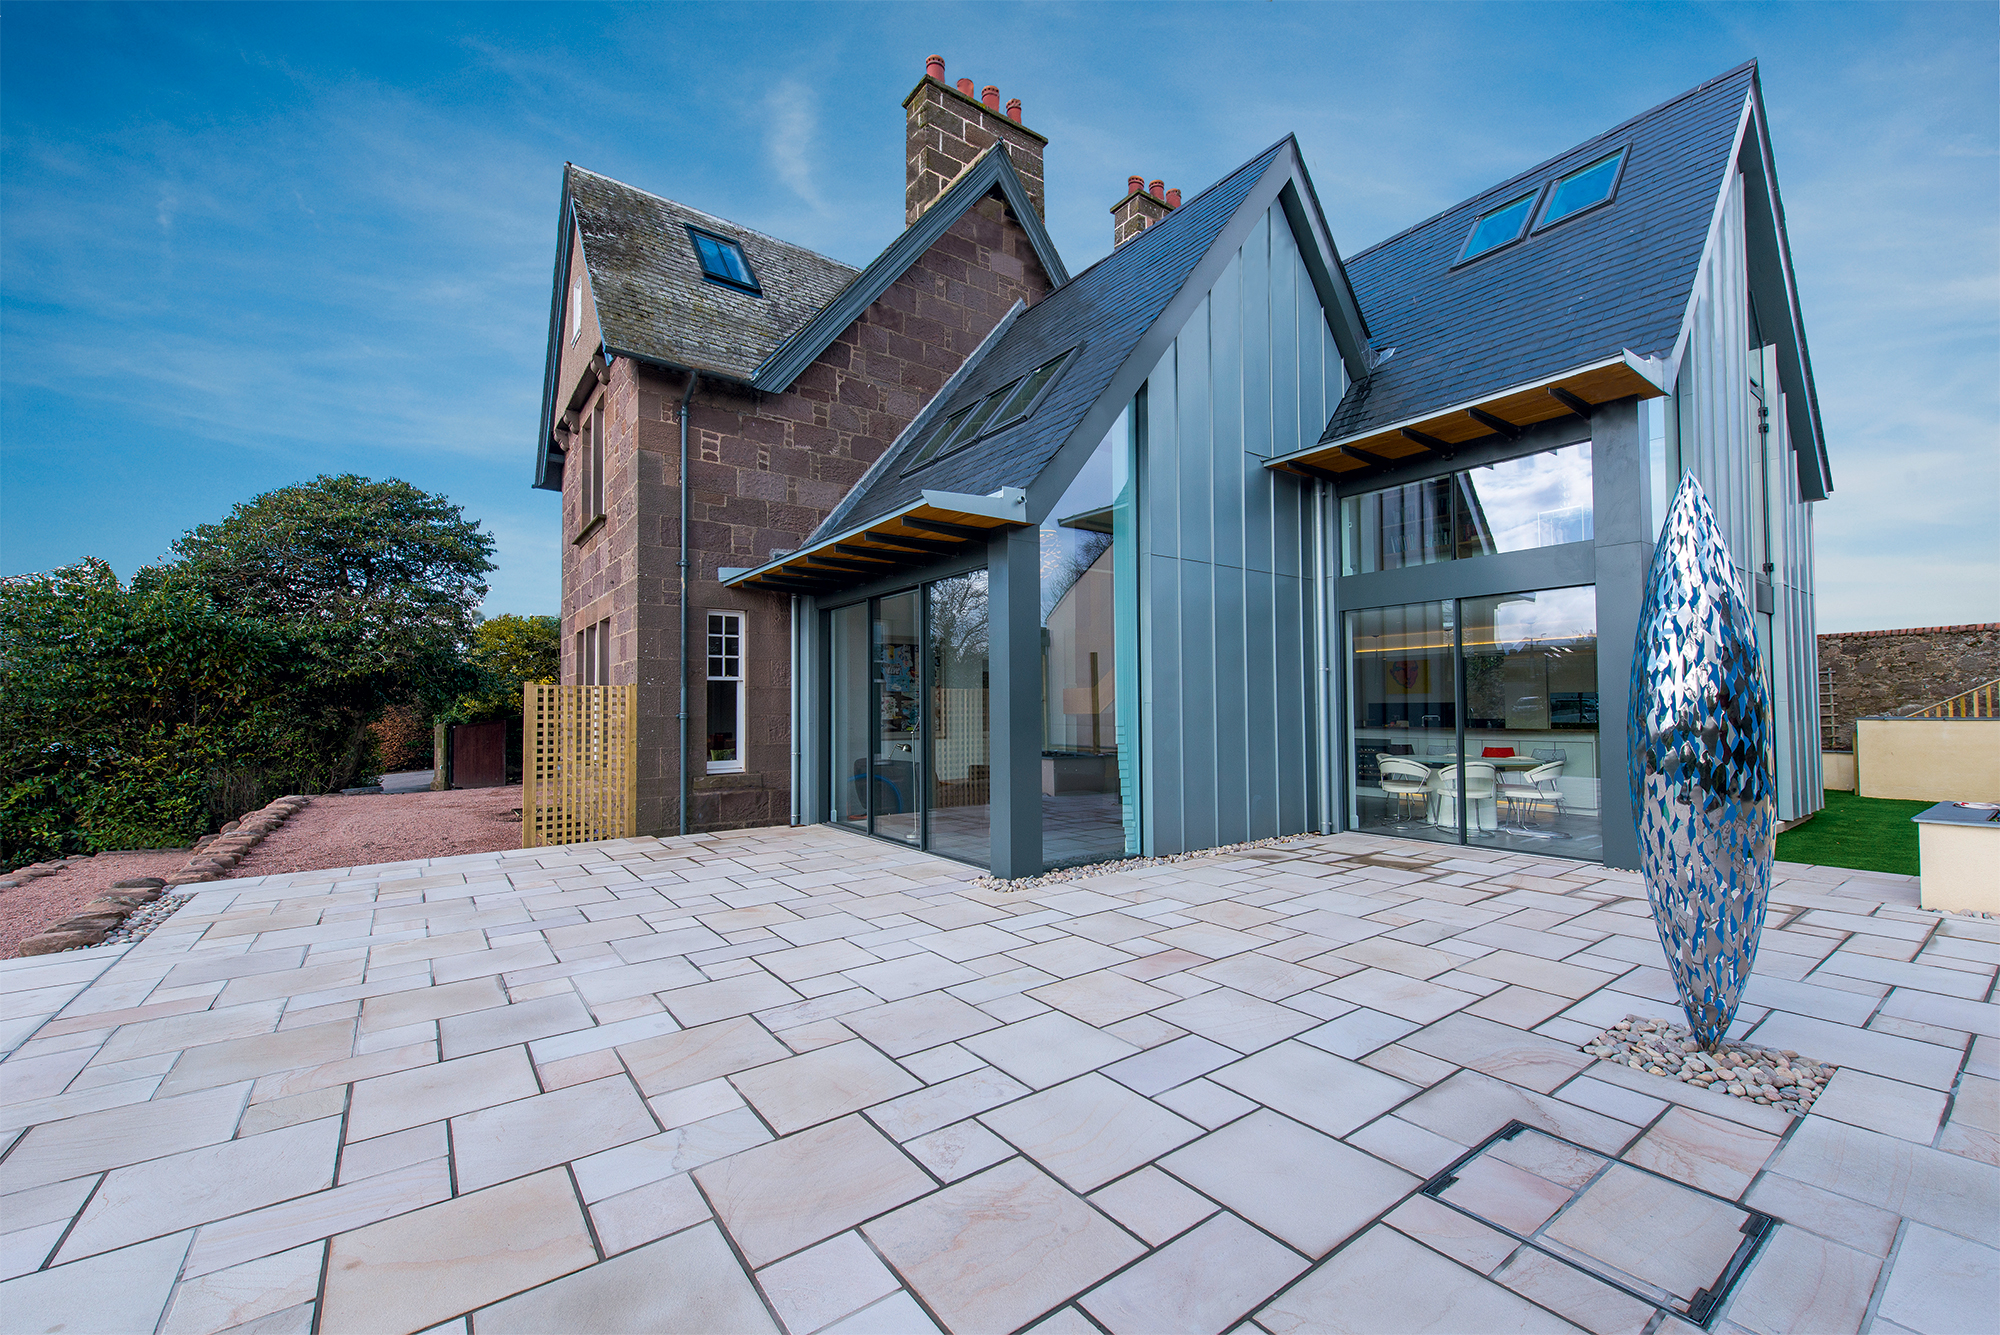 Traditional Home with a Zinc-Clad Extension - Build It